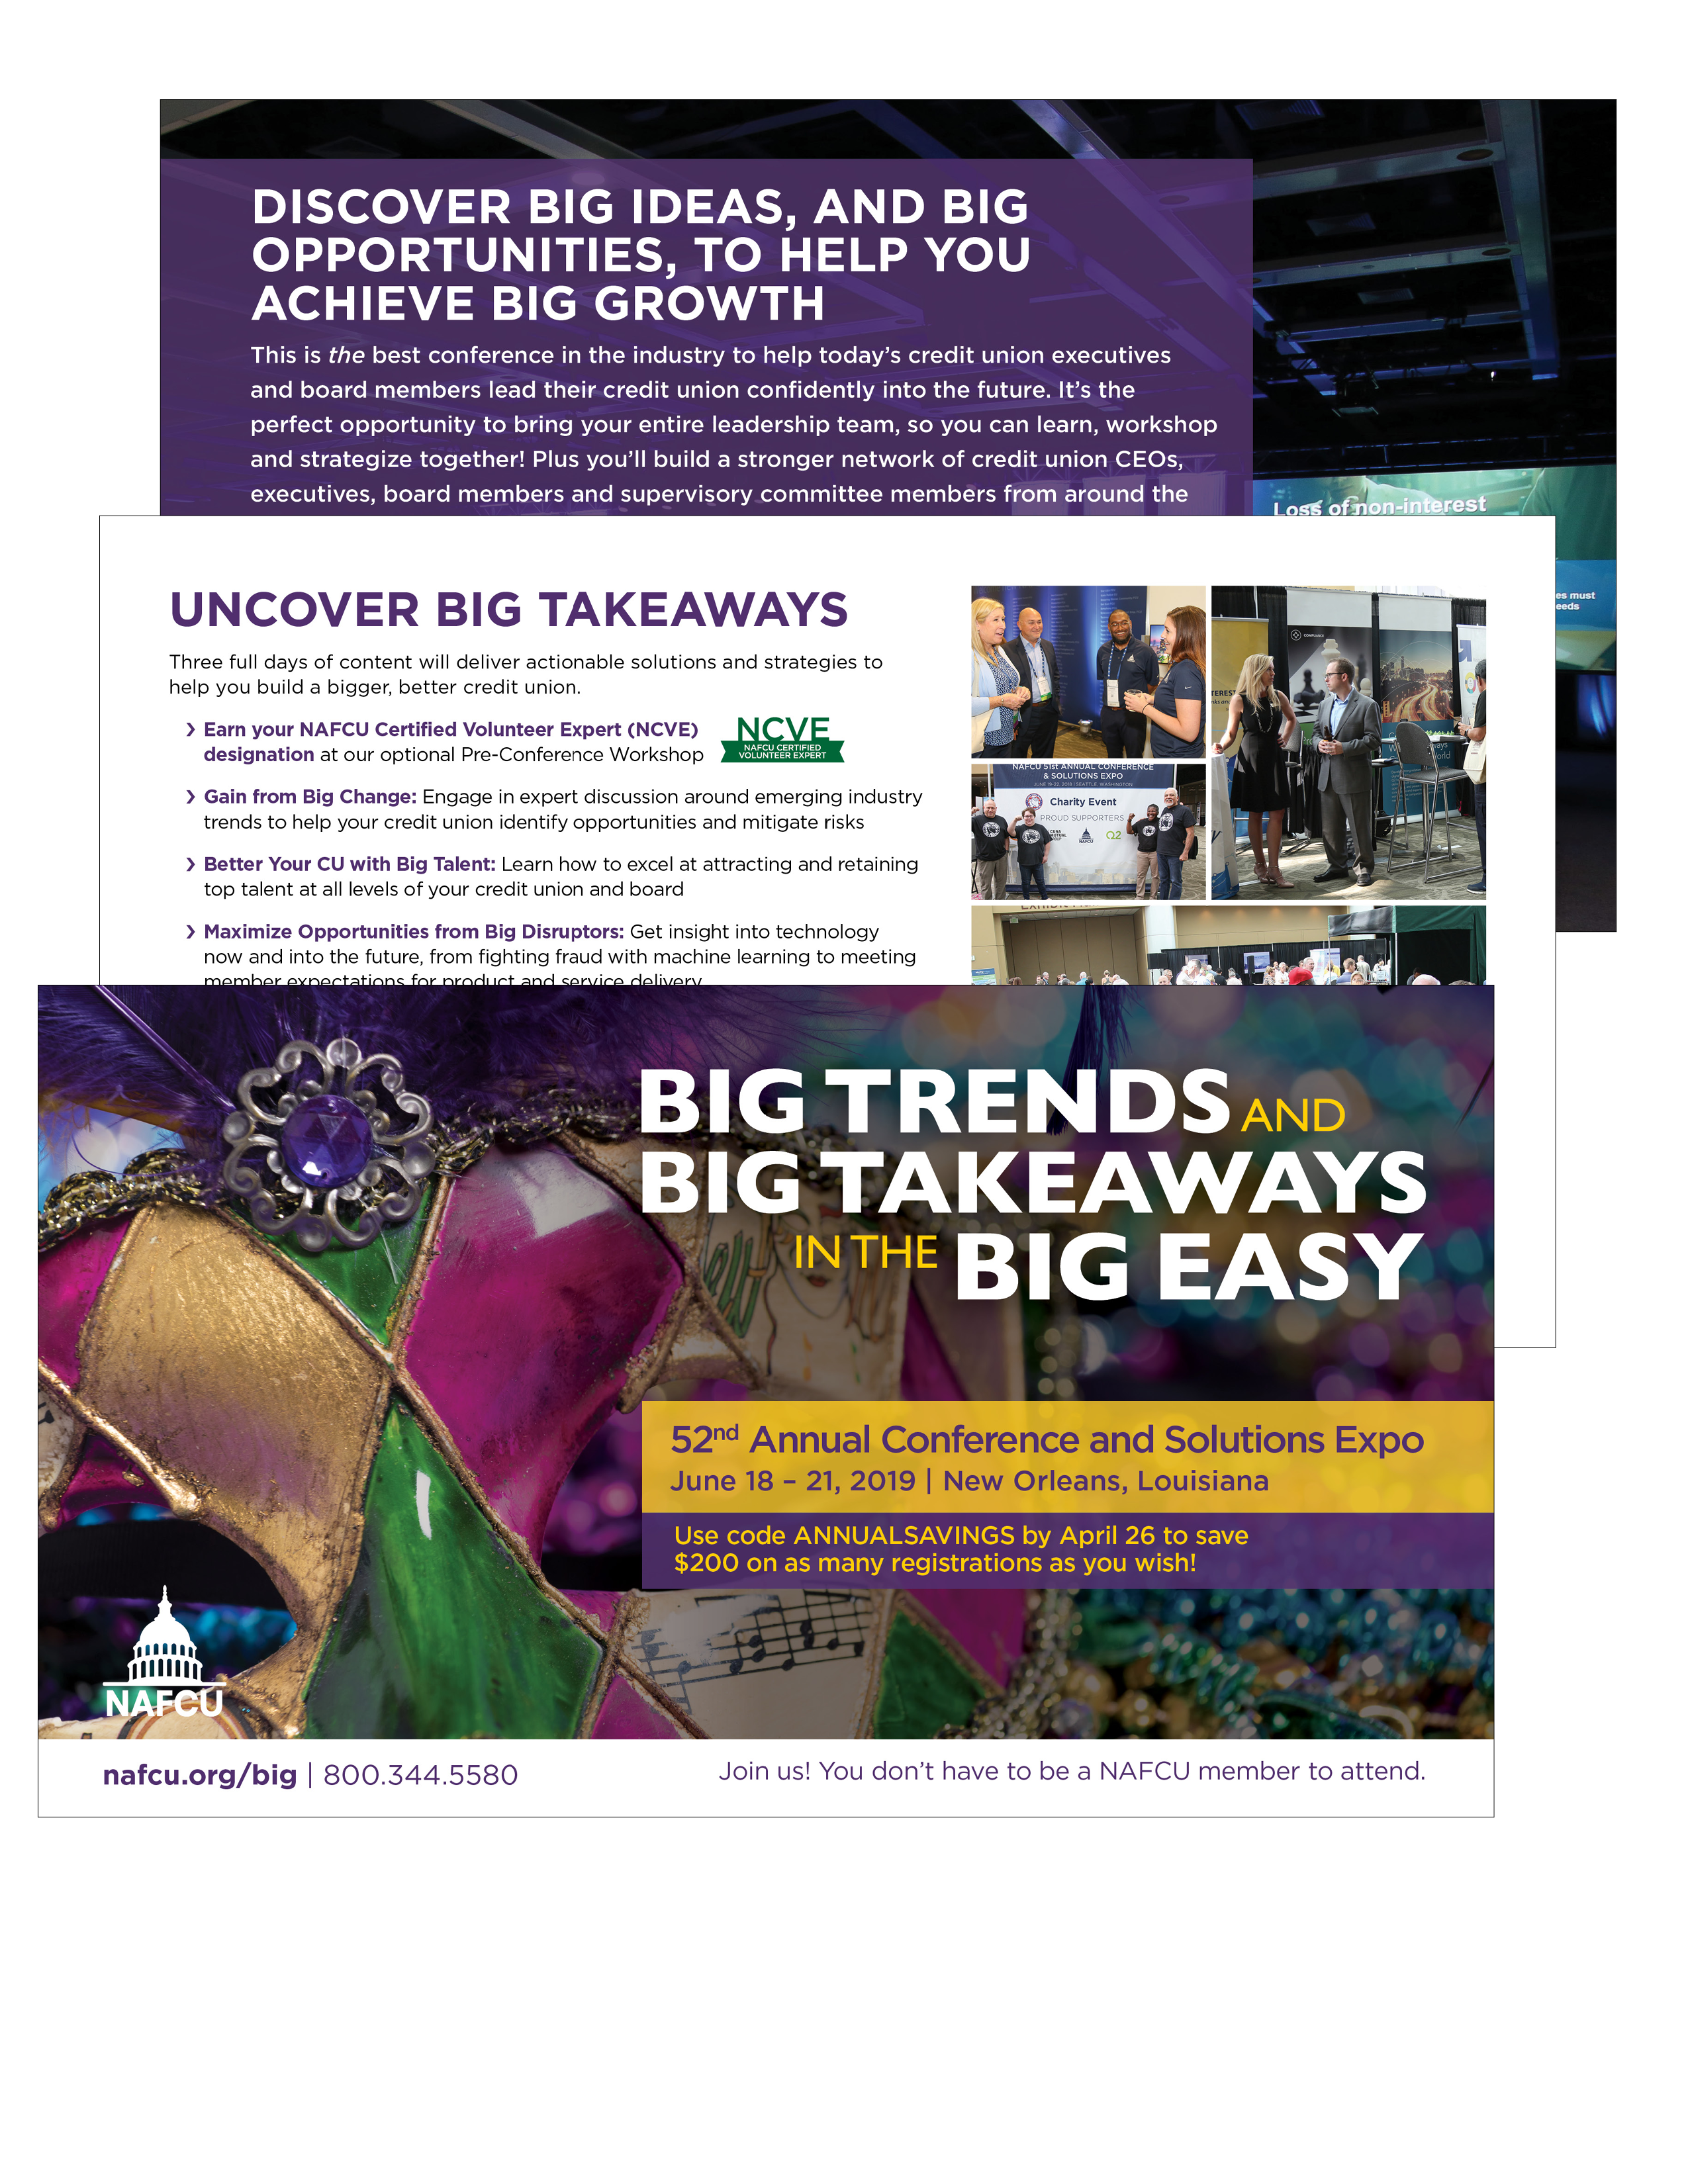 Download NAFCU's 52nd Annual Conference and Solutions Expo Brochure NAFCU